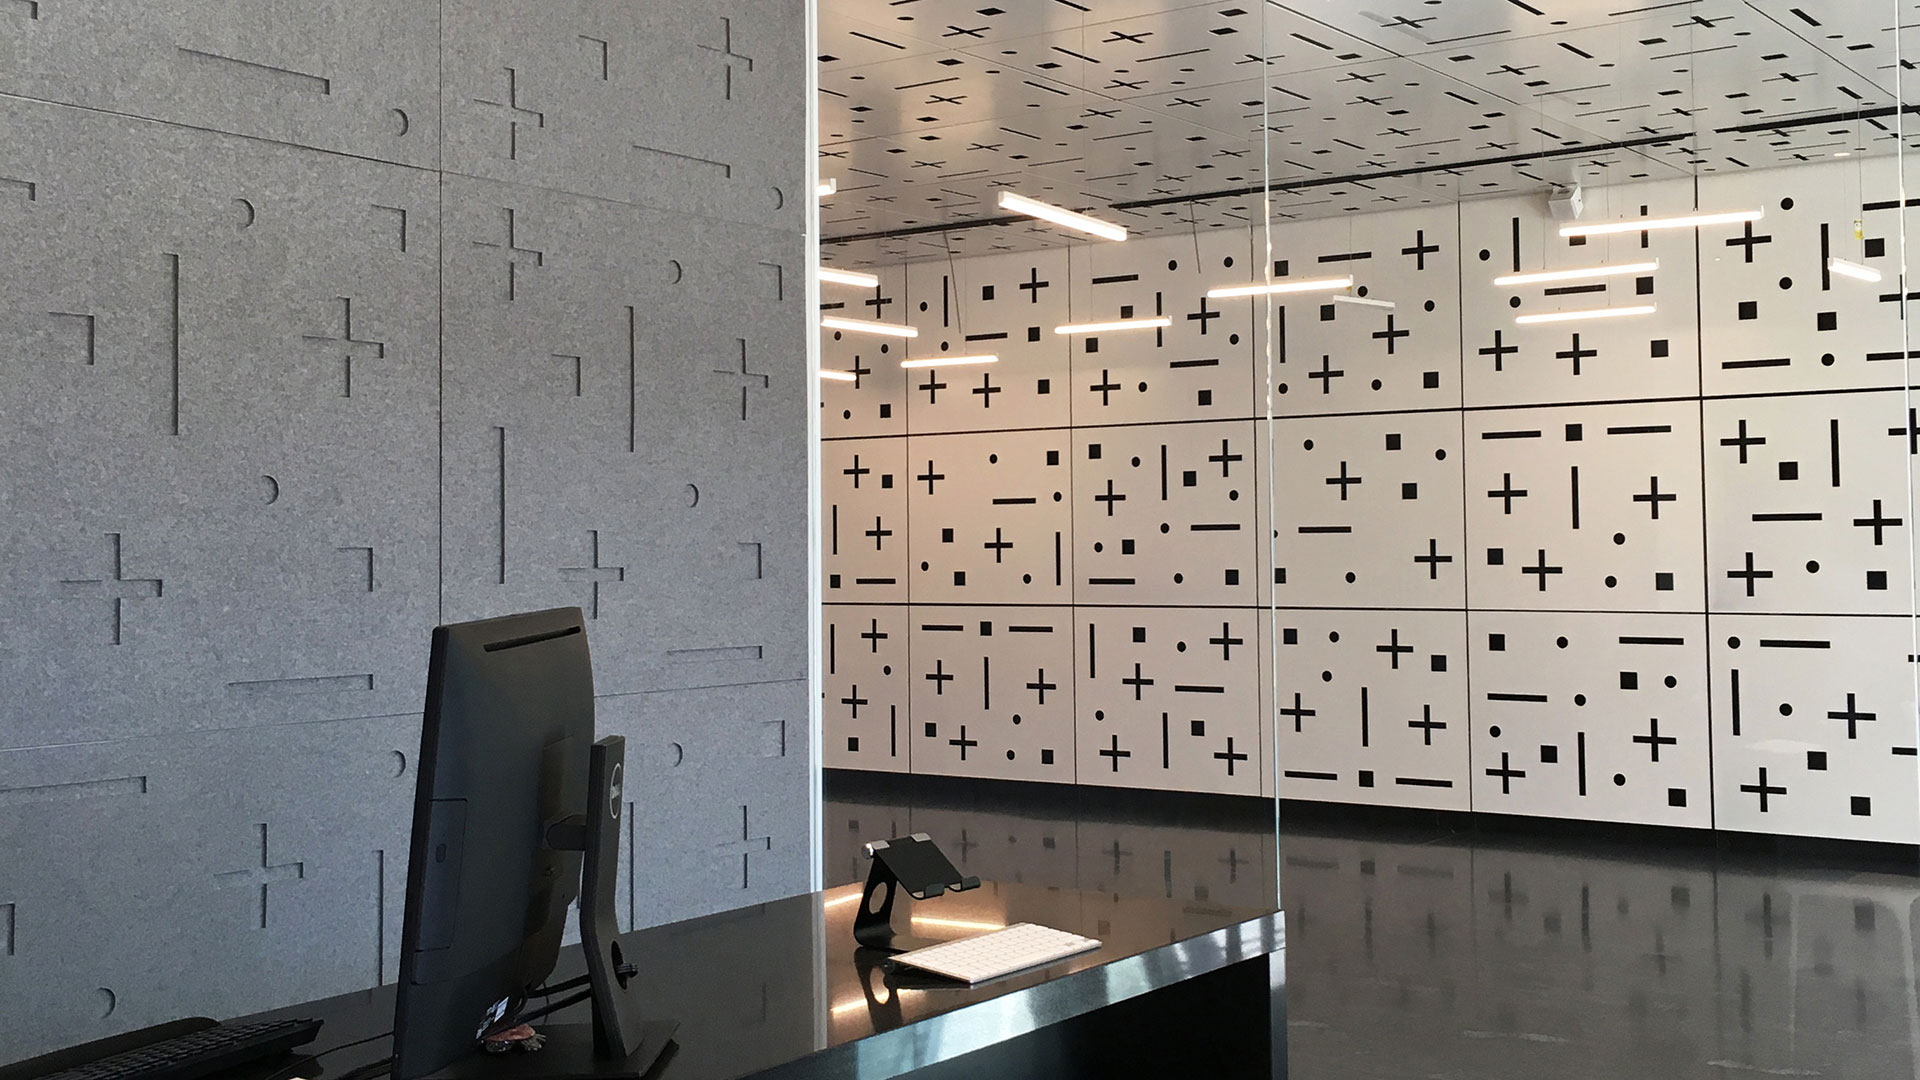 Gray wall covering at left with plus and minus pattern. The lobby to the right has a wall with a similar pattern in black and white